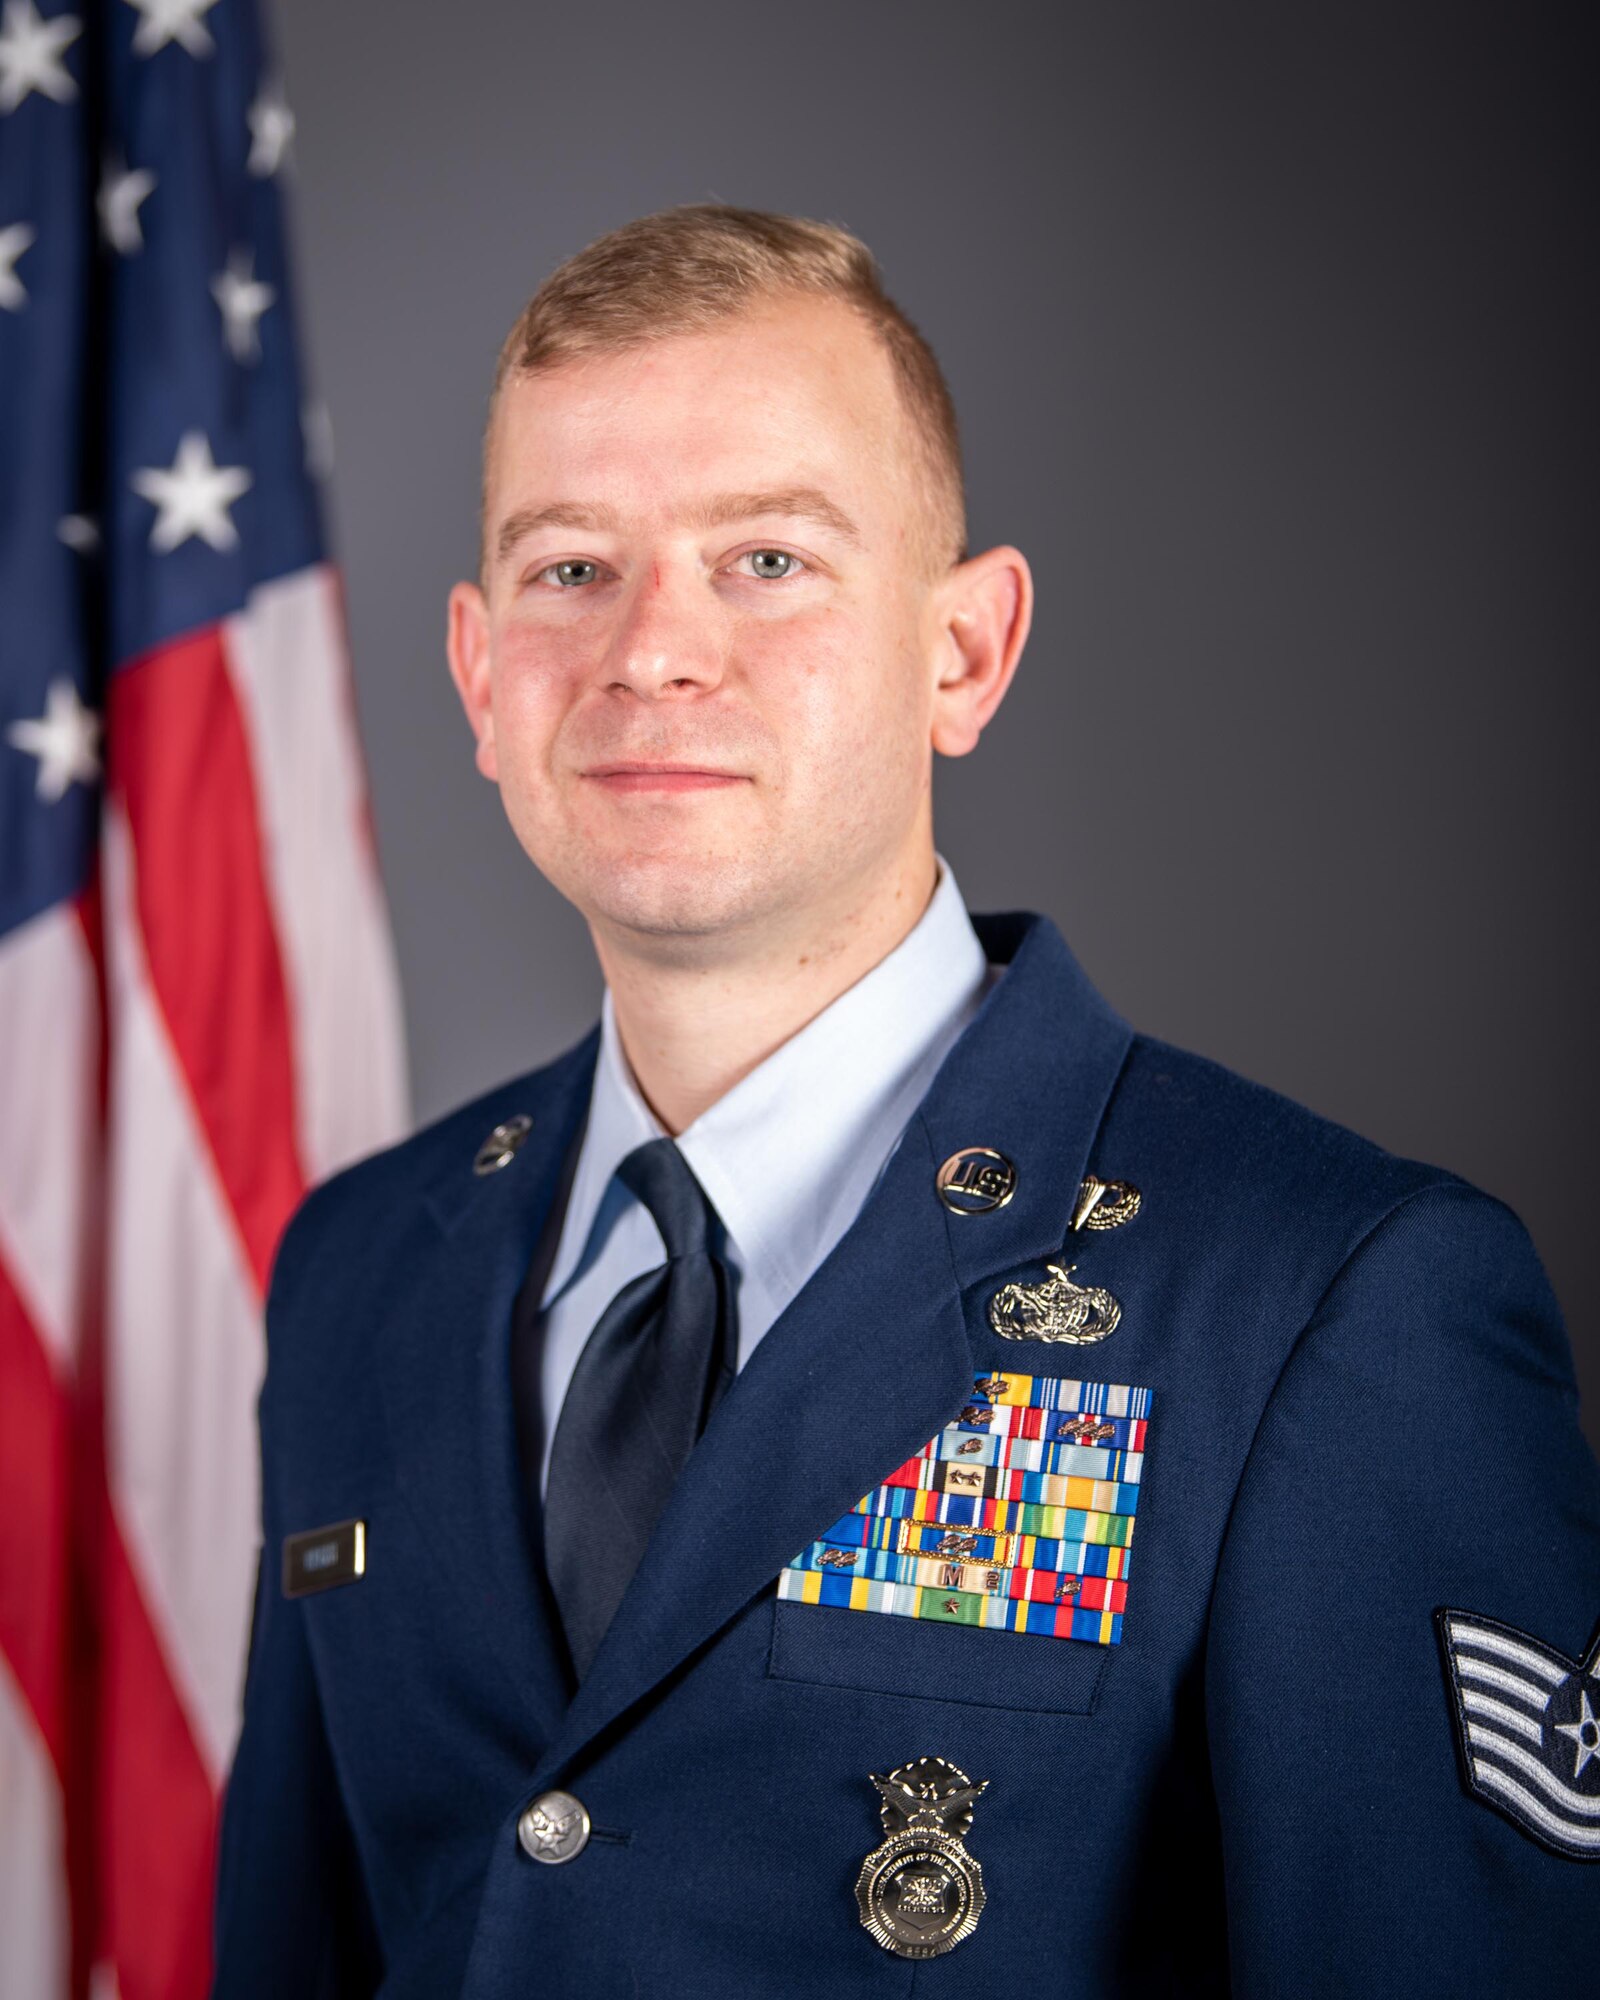 Tech. Sgt. Elijah Wright has been named the 2022 Kentucky Air National Guard Airman of the Year in the Non-Commissioned Officer category. Wright is a fire team leader in the 123rd Global Mobility Readiness Squadron. (U.S. Air National Guard photo by Phil Speck)